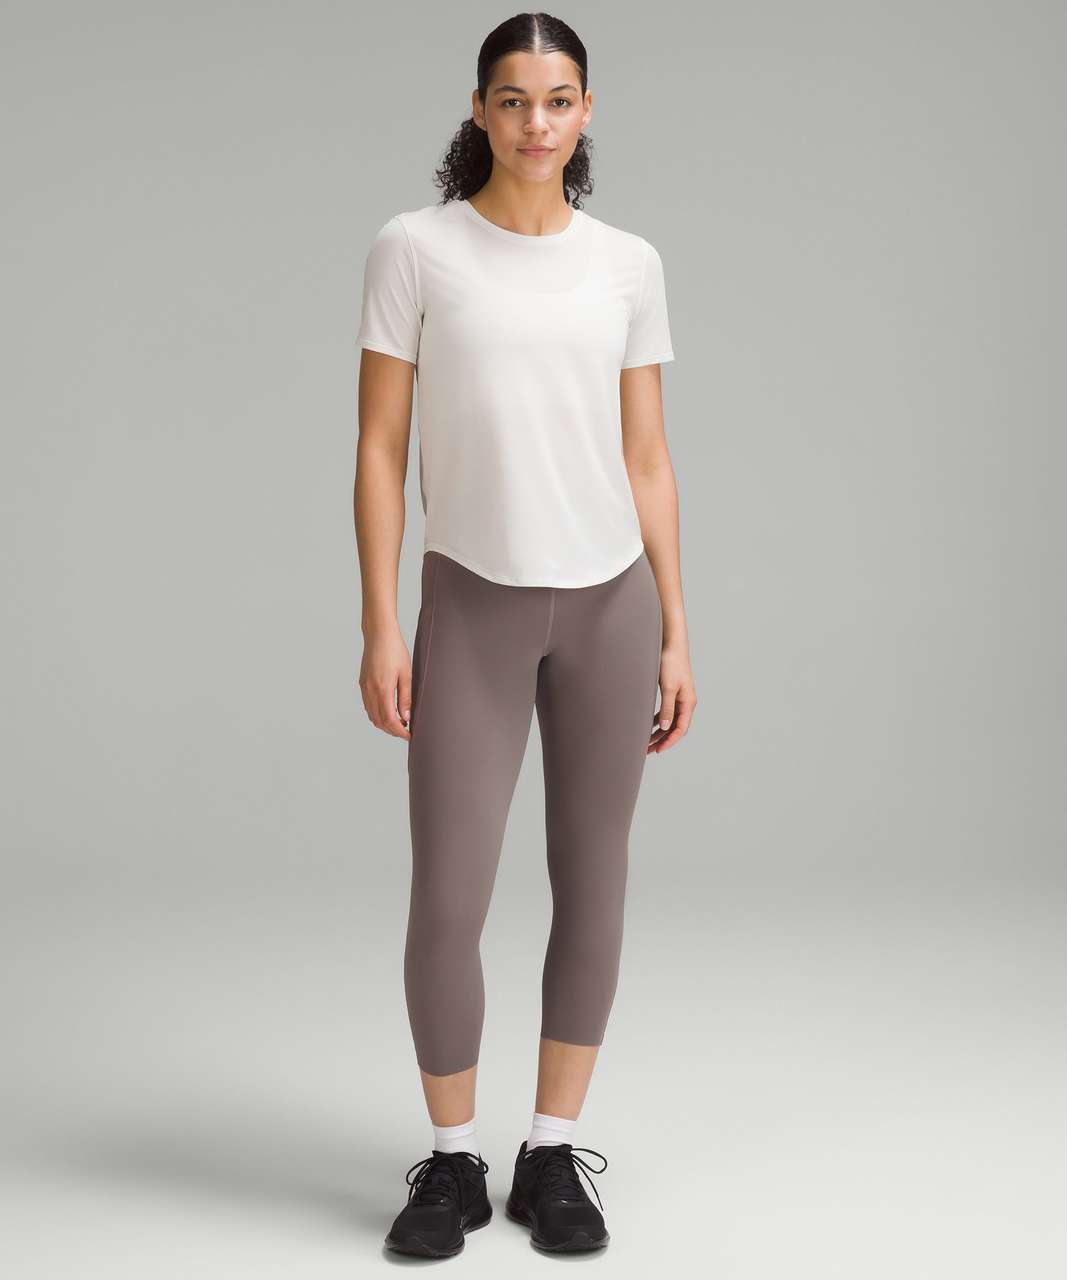 Lululemon Fast and Free High-Rise Crop 23" Pockets *Updated - Carbon Dust